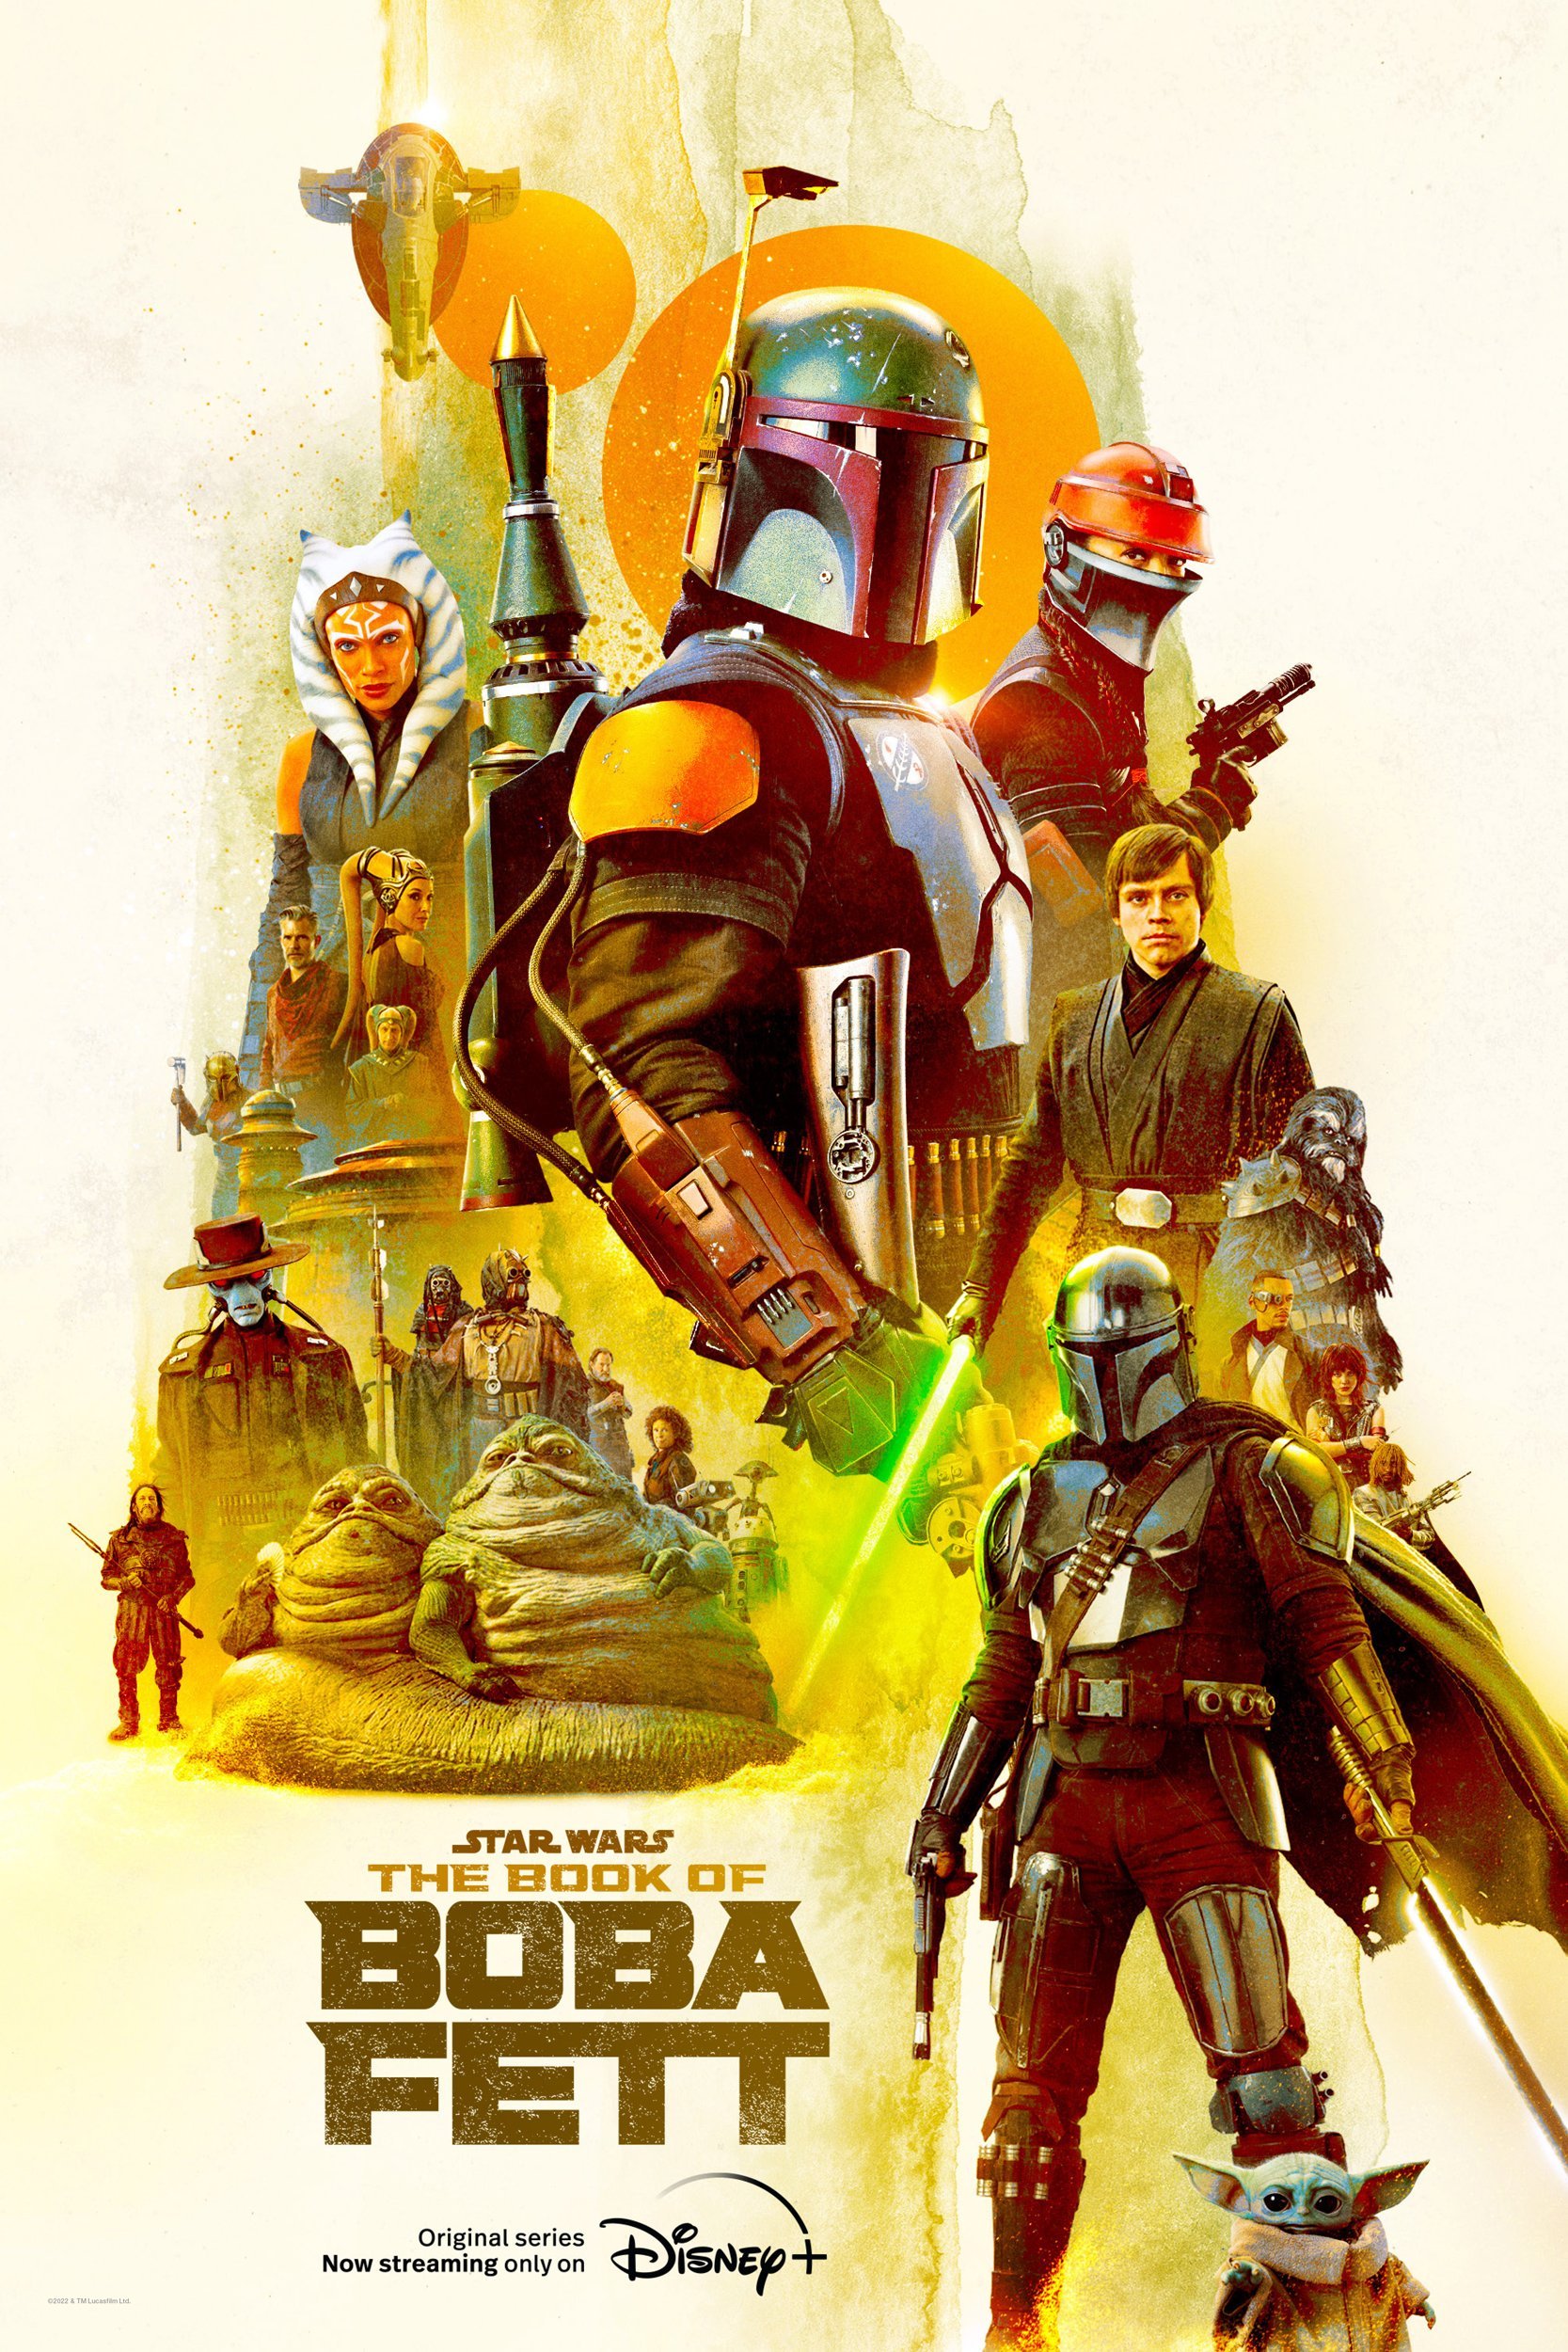 Poster Arrives Ahead - \'The Fett\' Star Finale Net of Book Boba Season\'s News of New Wars Character-Filled